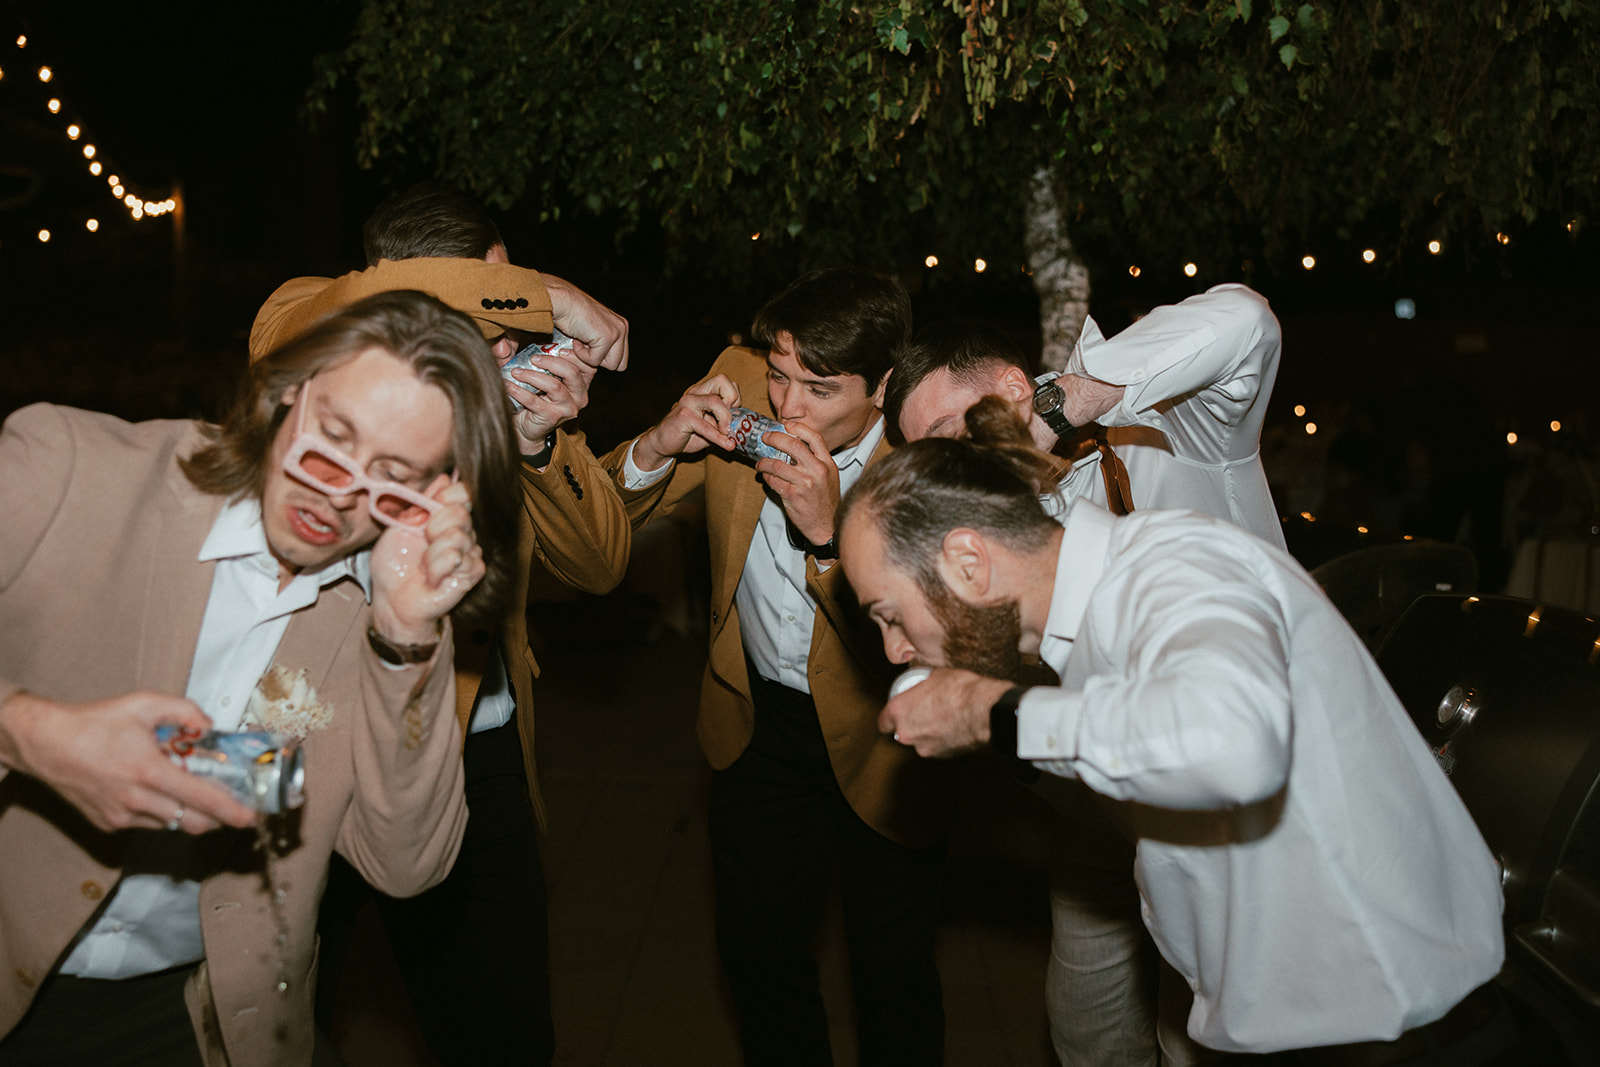 Guests chugging beers during wedding reception